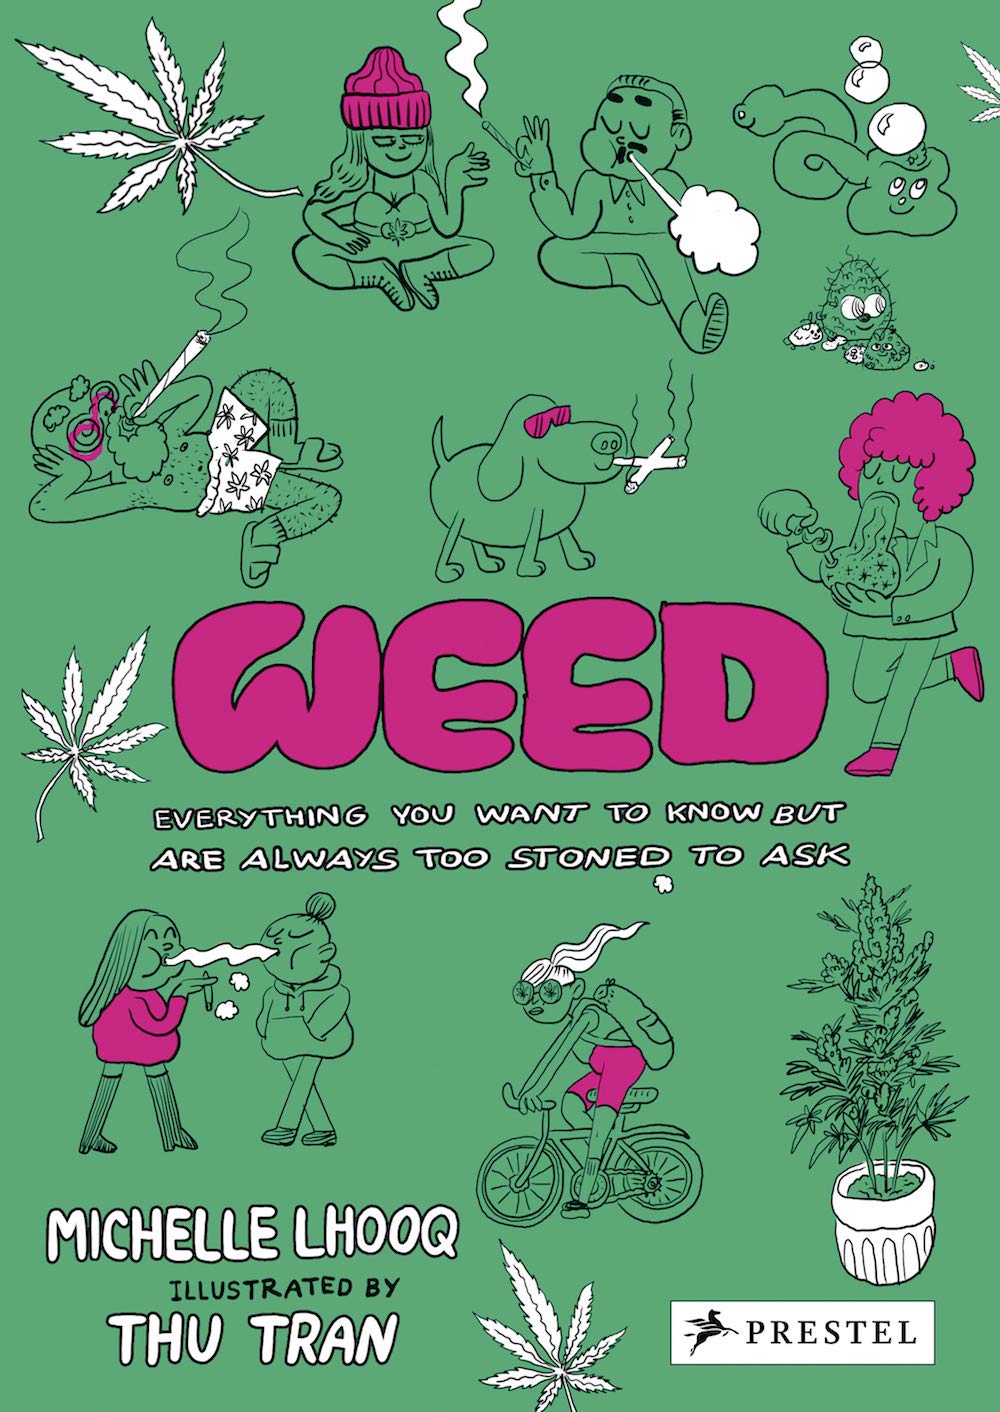 Weed: Everything You Wanted to Know But Are Always Too Stoned To Ask